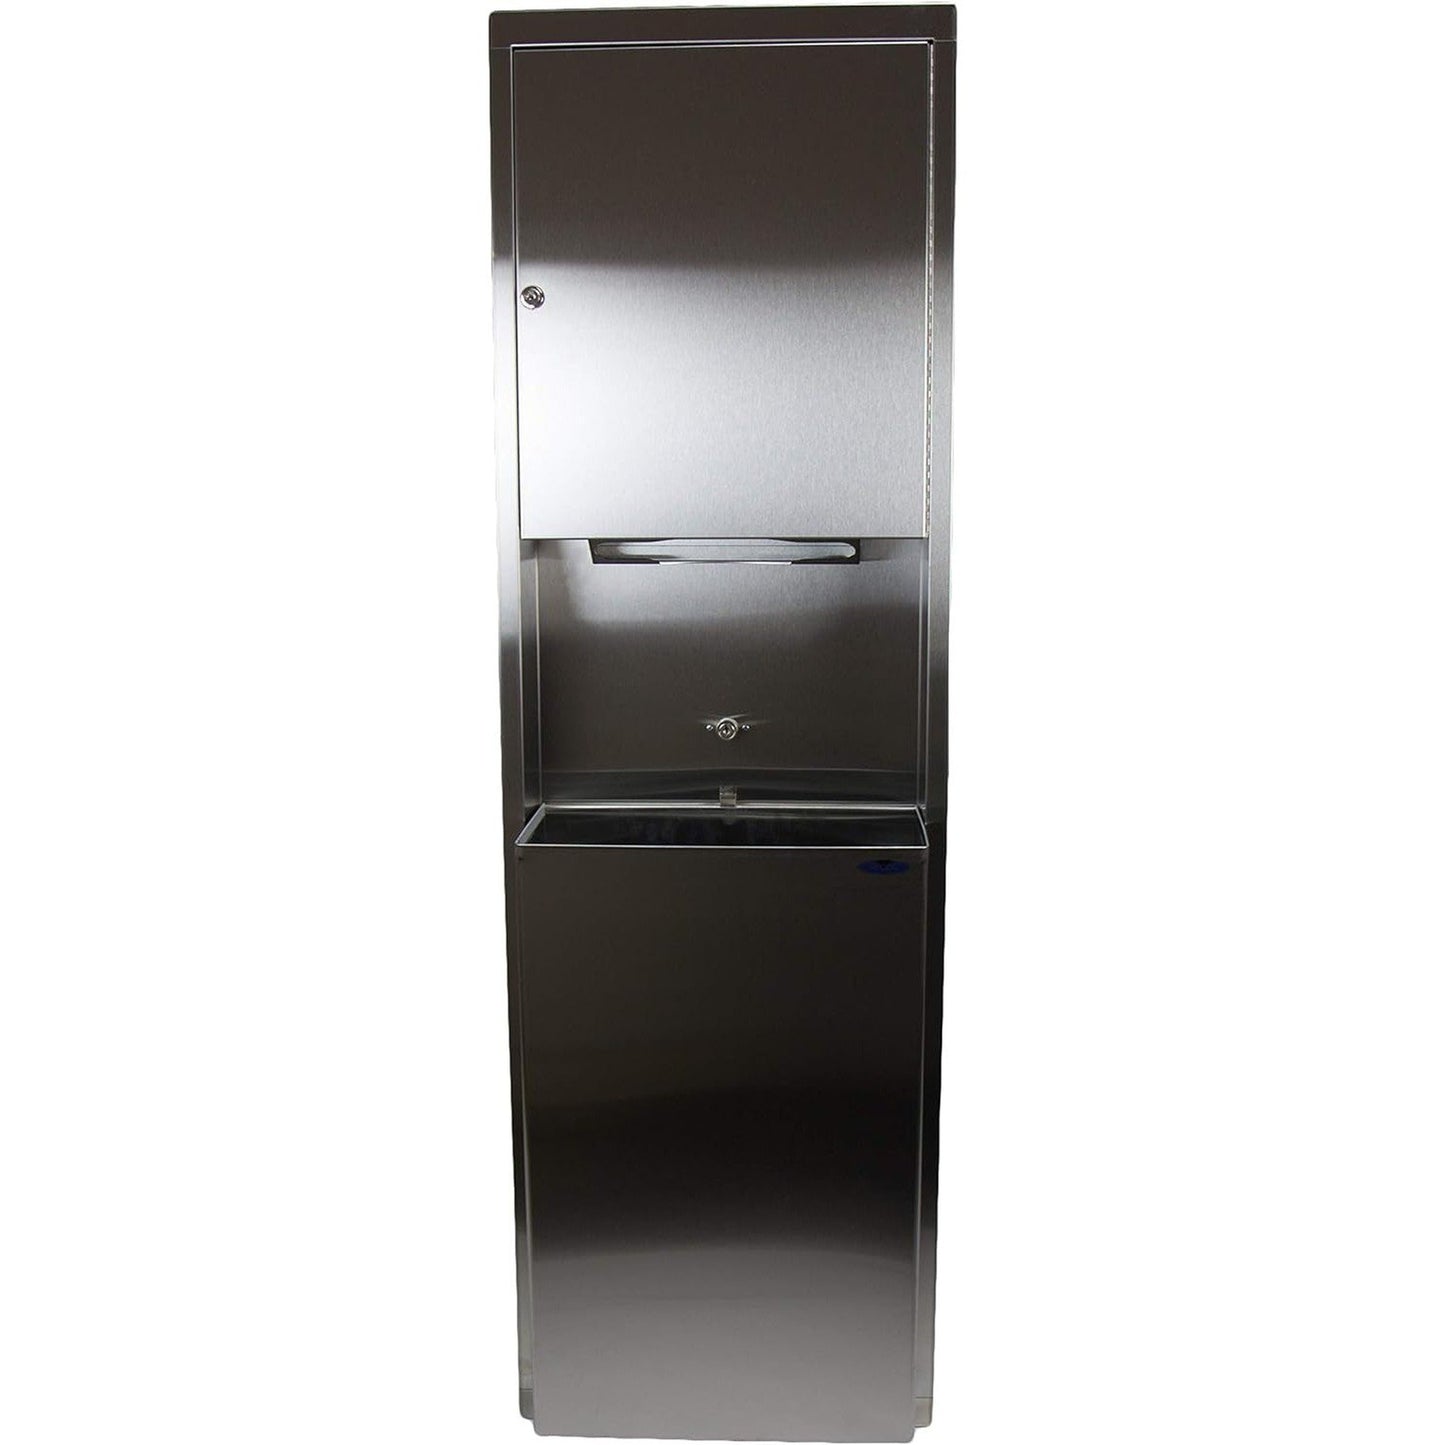 Frost 422C Wall Mounted Stainless Steel Paper Dispenser and Disposal